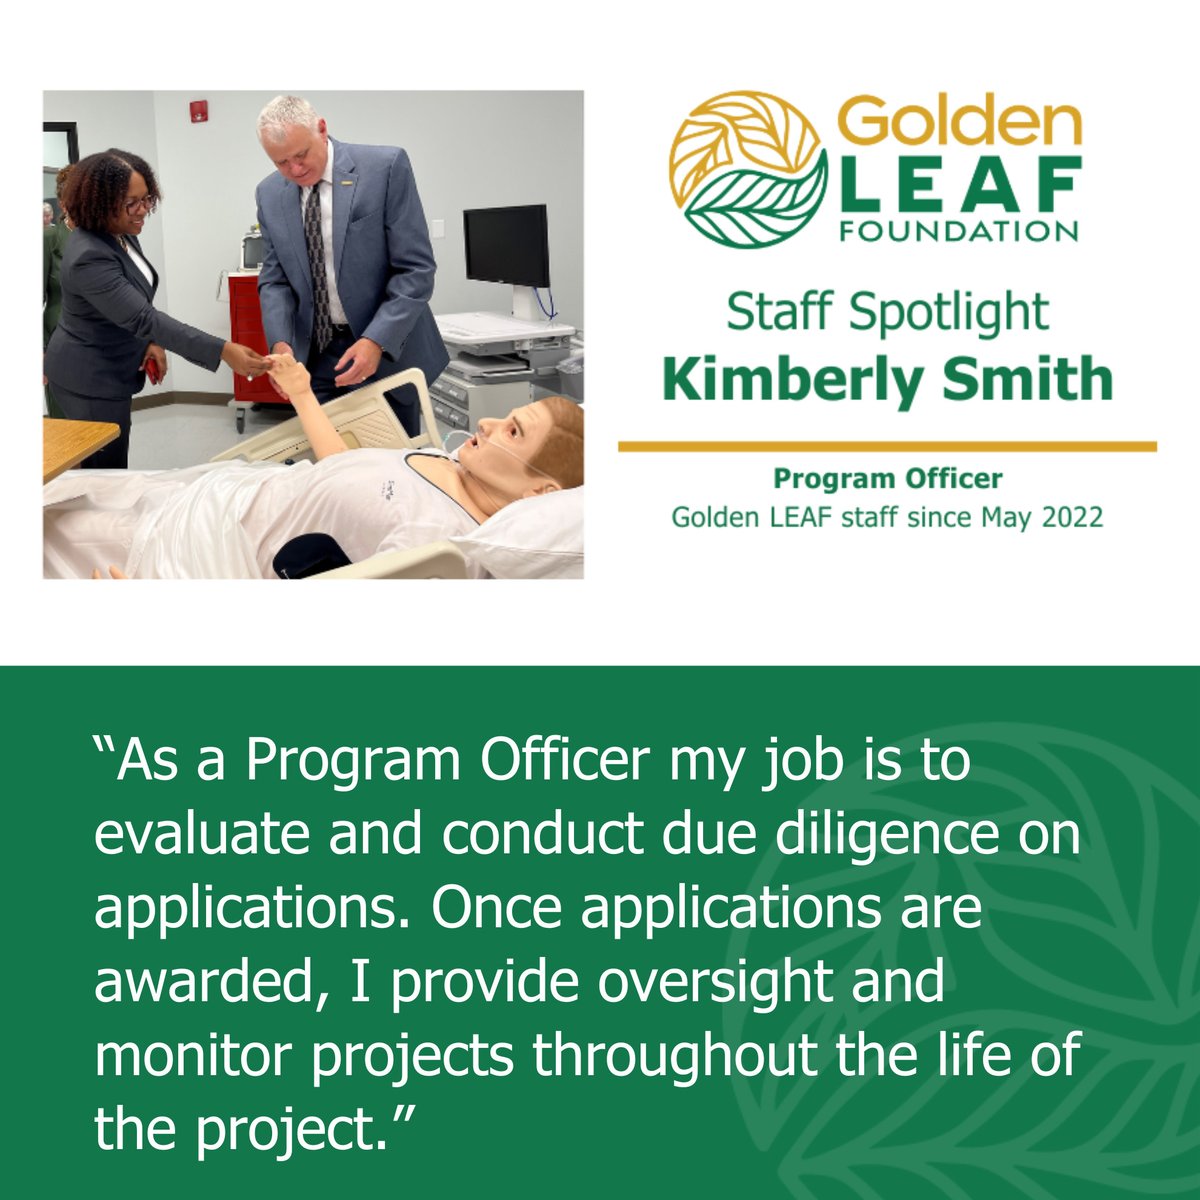 Get to know Program Officer Kimberly Smith! 'I am a product of rural eastern North Carolina and knowing that I play a small part in helping to increase economic opportunity across the state motivates me to show up with a smile.' Learn more about Kimberly: goldenleaf.org/news/staff-spo…